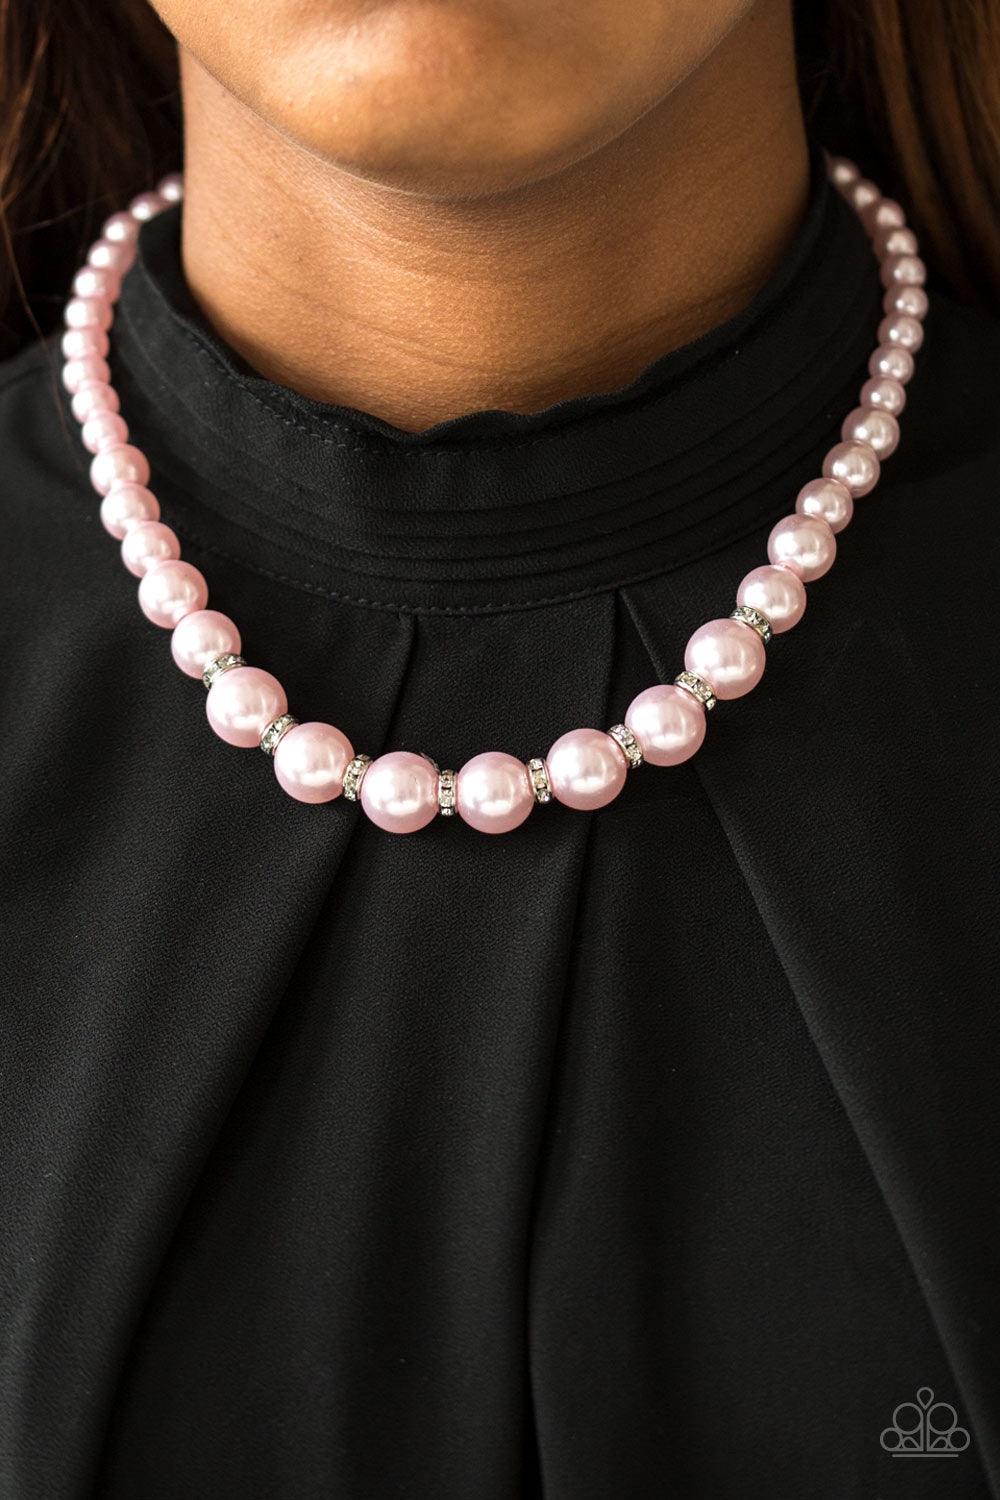 Paparazzi Accessories Showtime Shimmer - Pink Gradually increasing in size near the bottom, classic pink pearls drape below the collar. Rhinestone encrusted rings are sprinkled between the dramatic pearls, adding sparkling accents to the timeless pearl pa